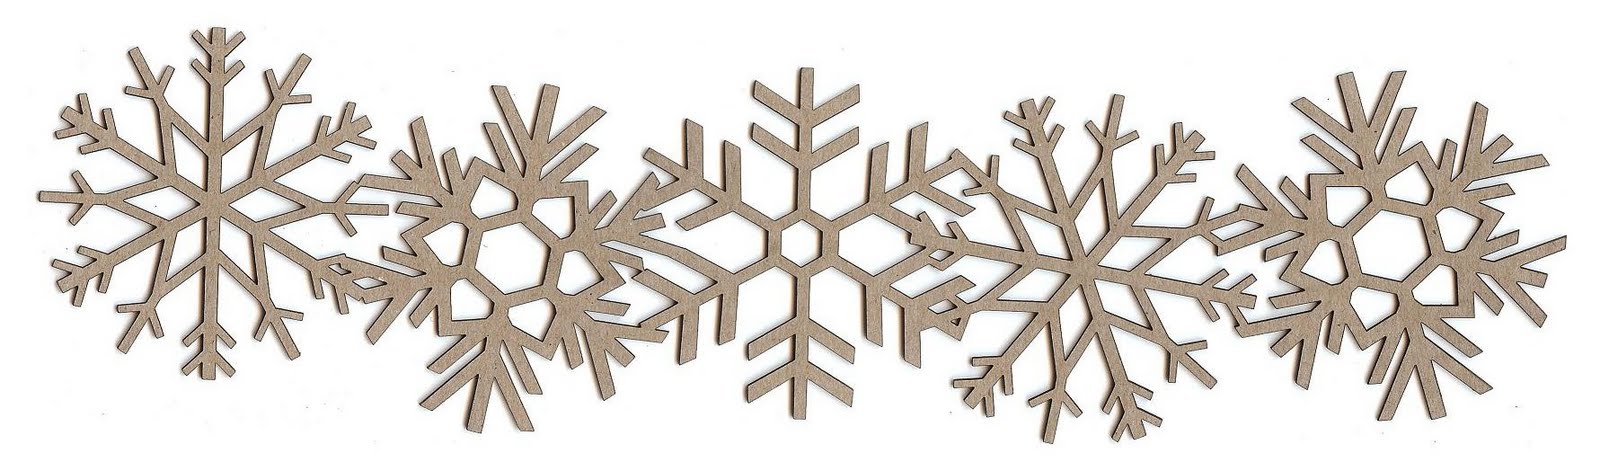 winter clipart lines - photo #2